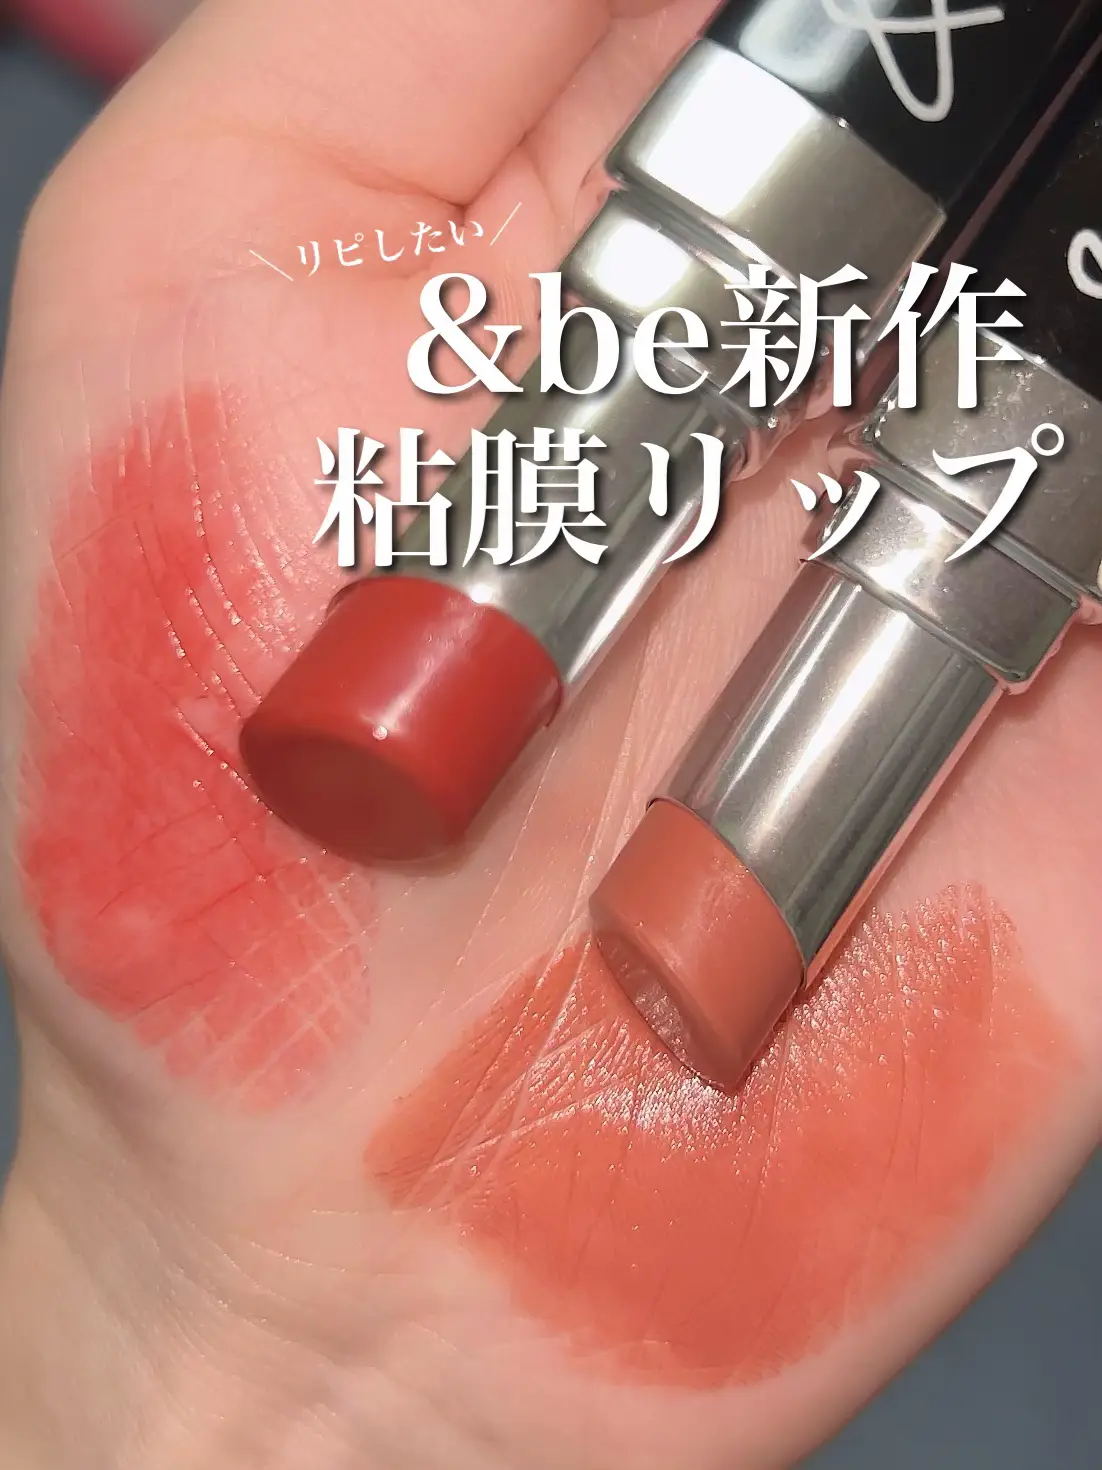 Mucosal Lip 💄] New release 💄 transparent mucosal lip from & be